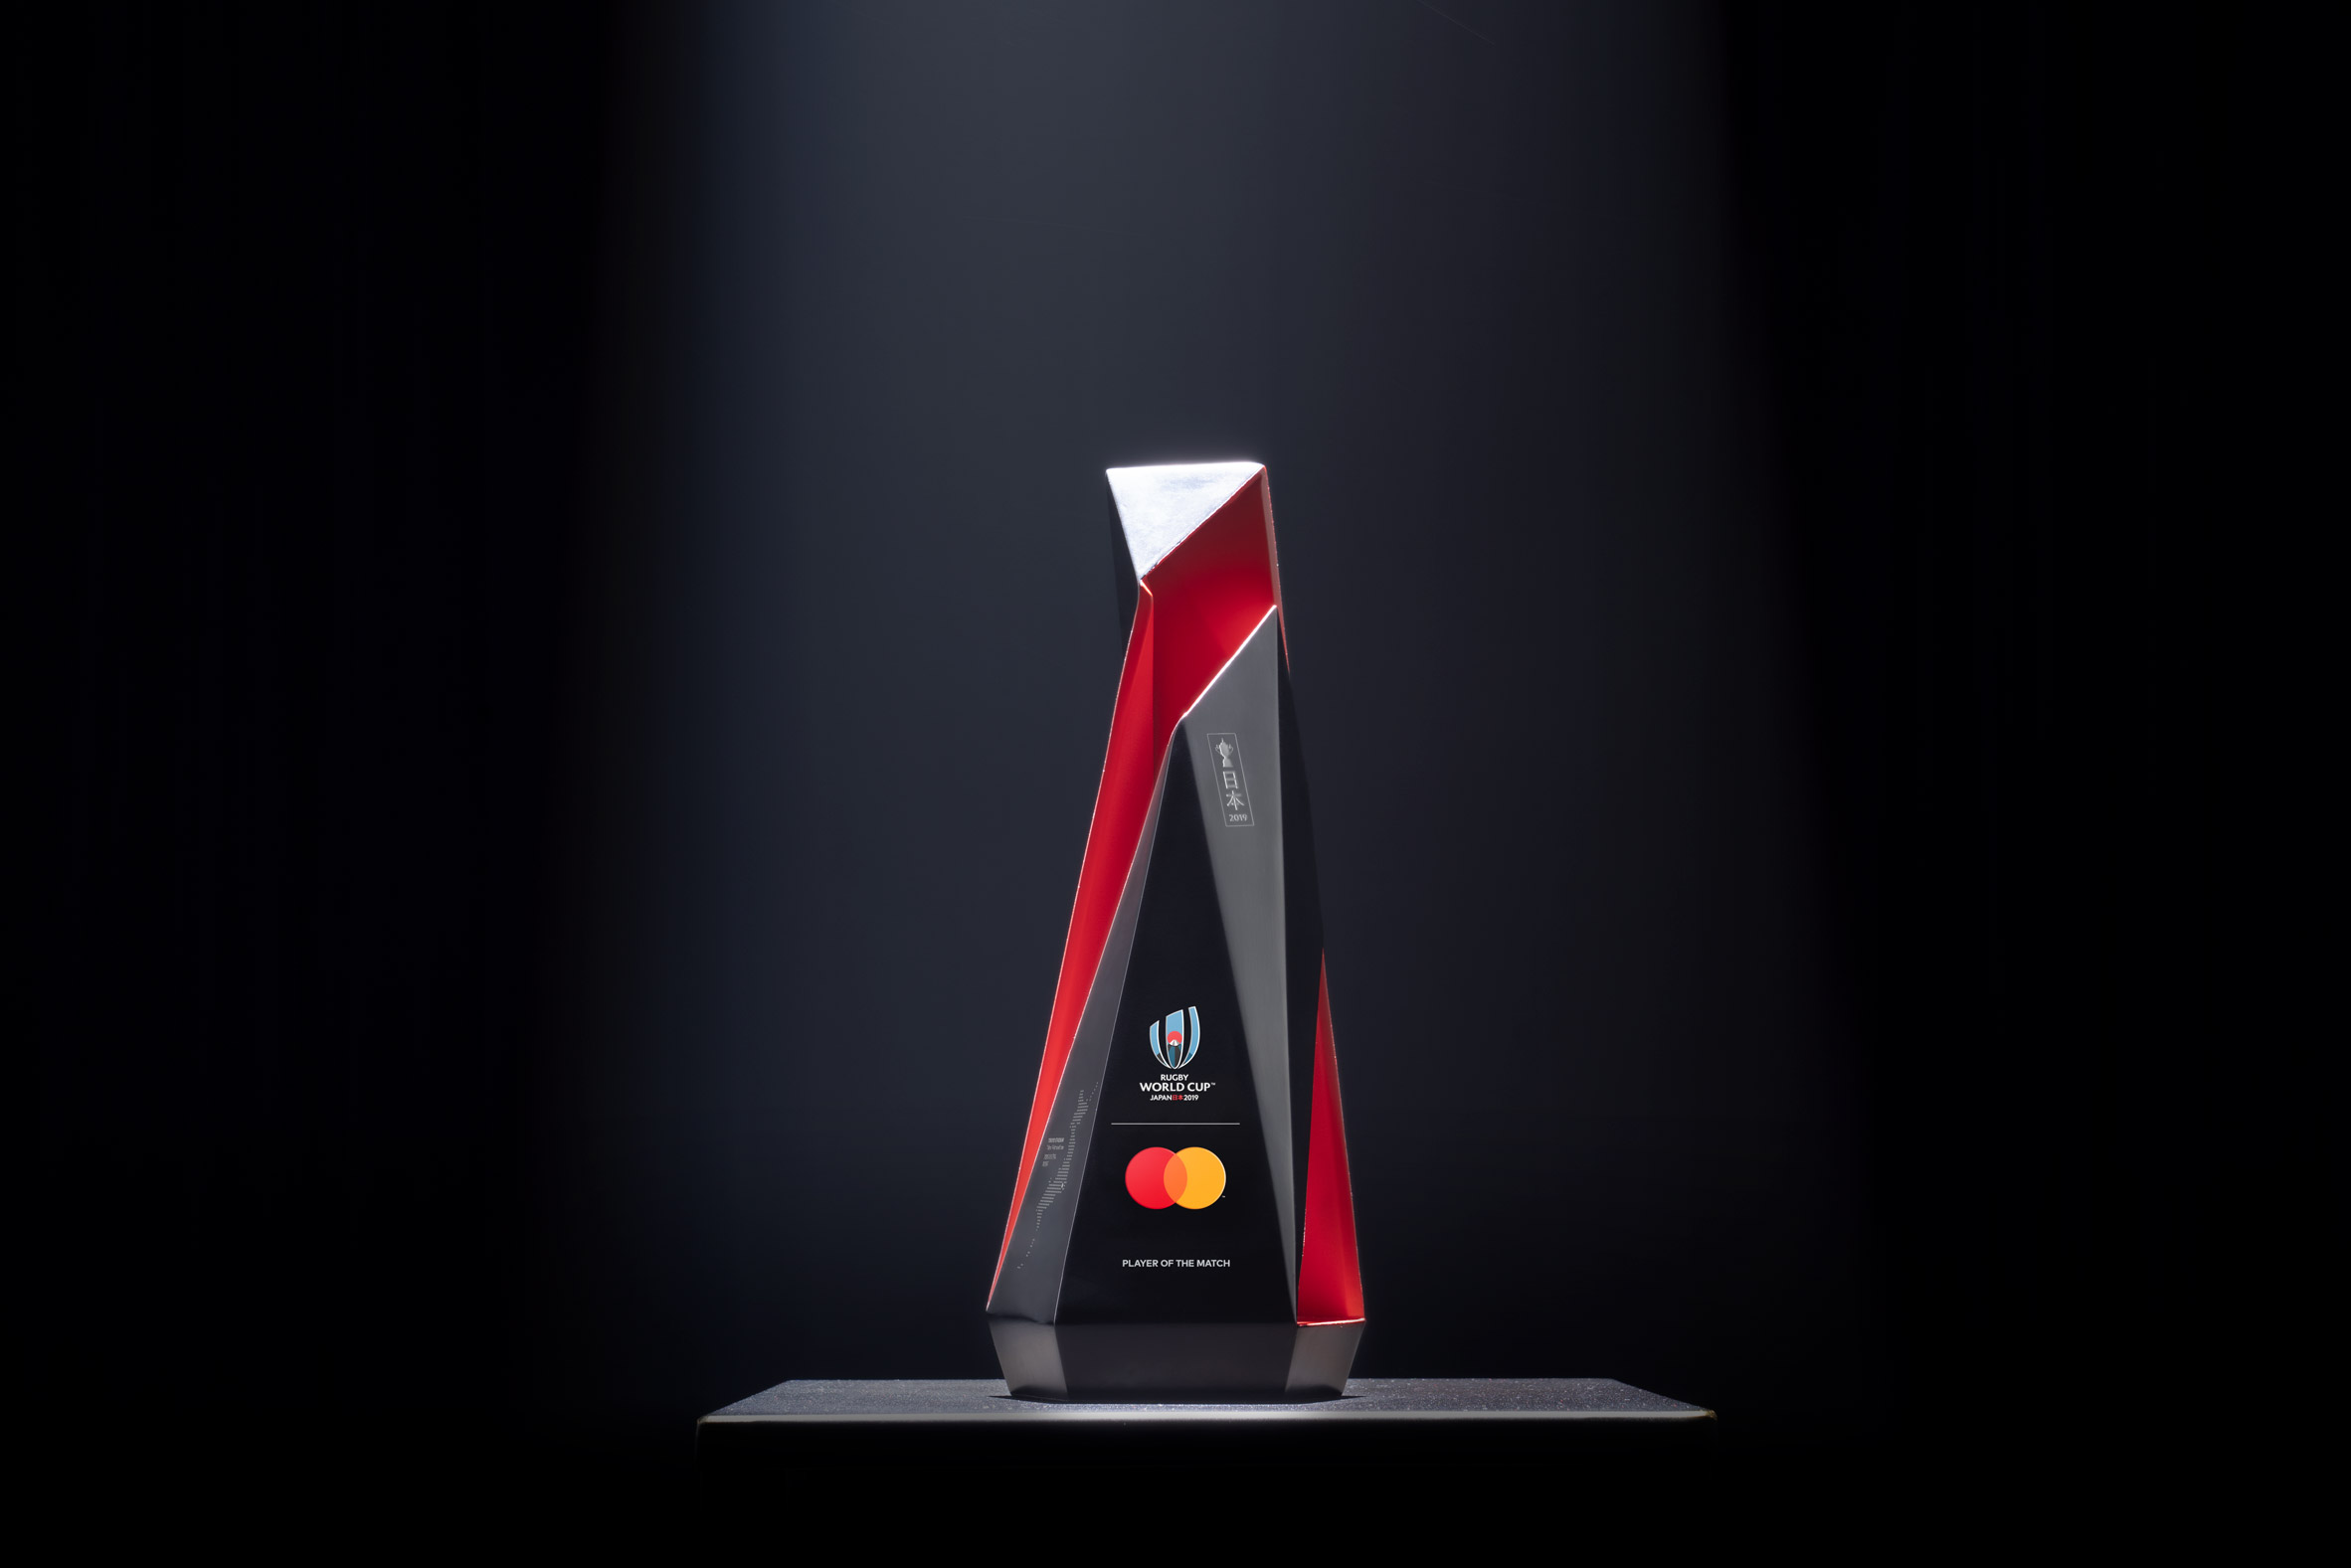 Jun Mitani creates live-etched Mastercard Player of the Match trophies for Rugby World Cup